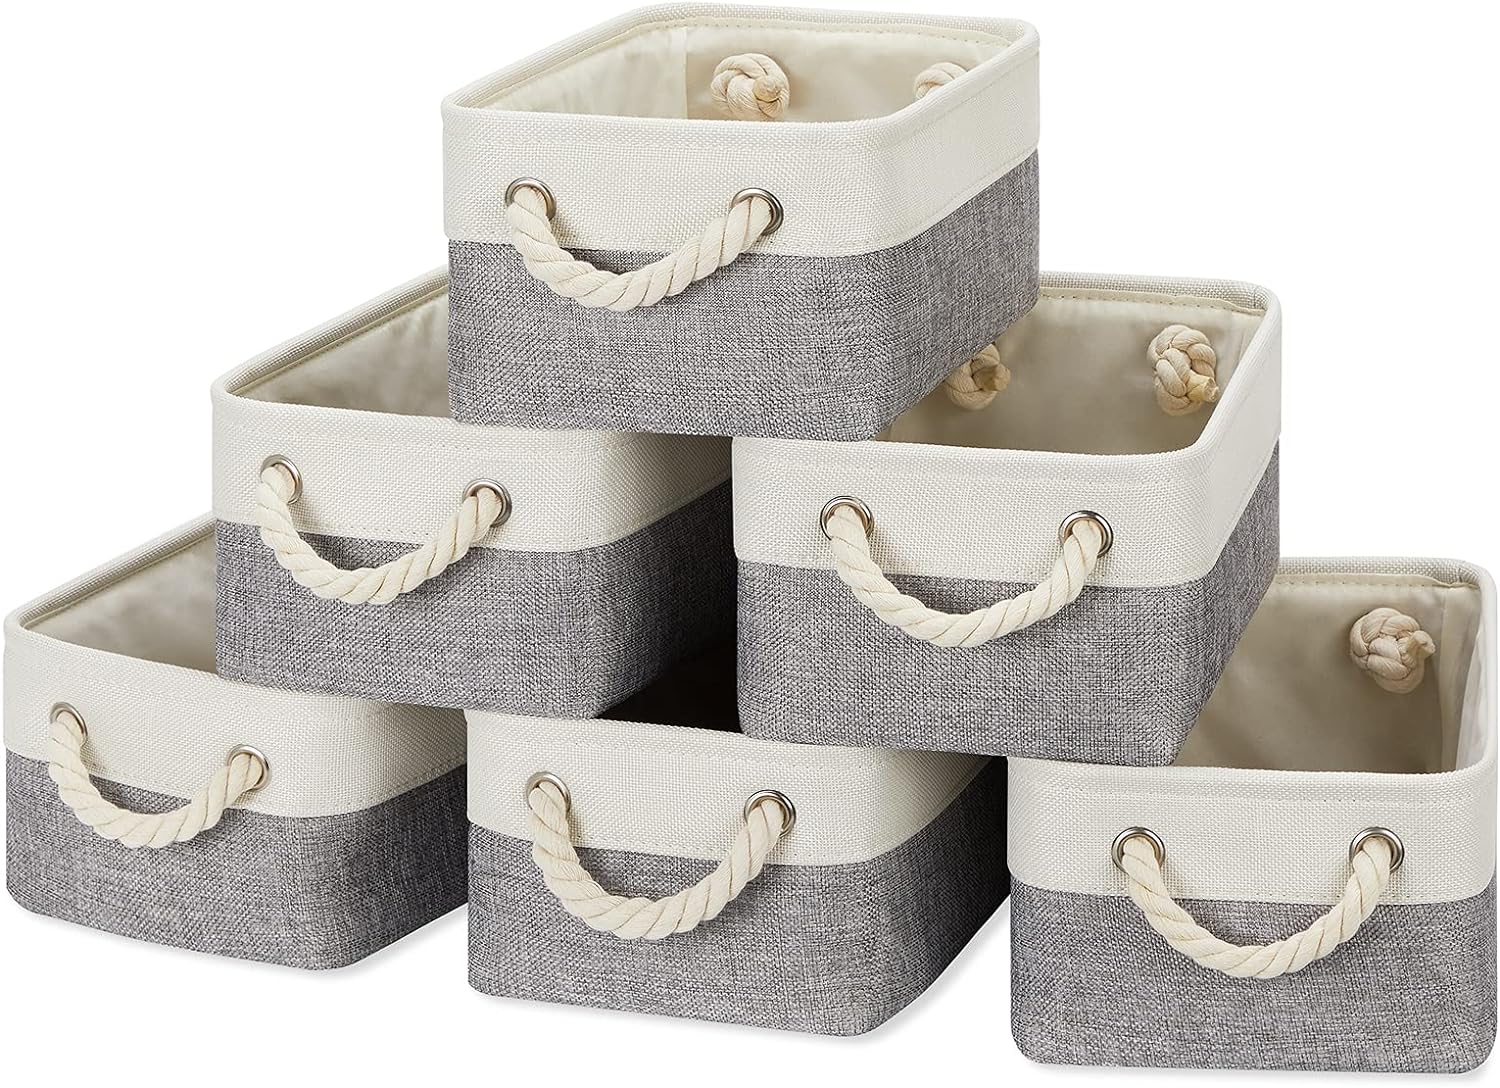 Temary Small Fabric Storage Baskets for Organizing Toys, 6Pcs Small Storage Bins, Decorative Collapsible Gift Baskets Empty for Home, Office, Nursery (White&Grey,11.8L x 7.9W x 5.3H inches)